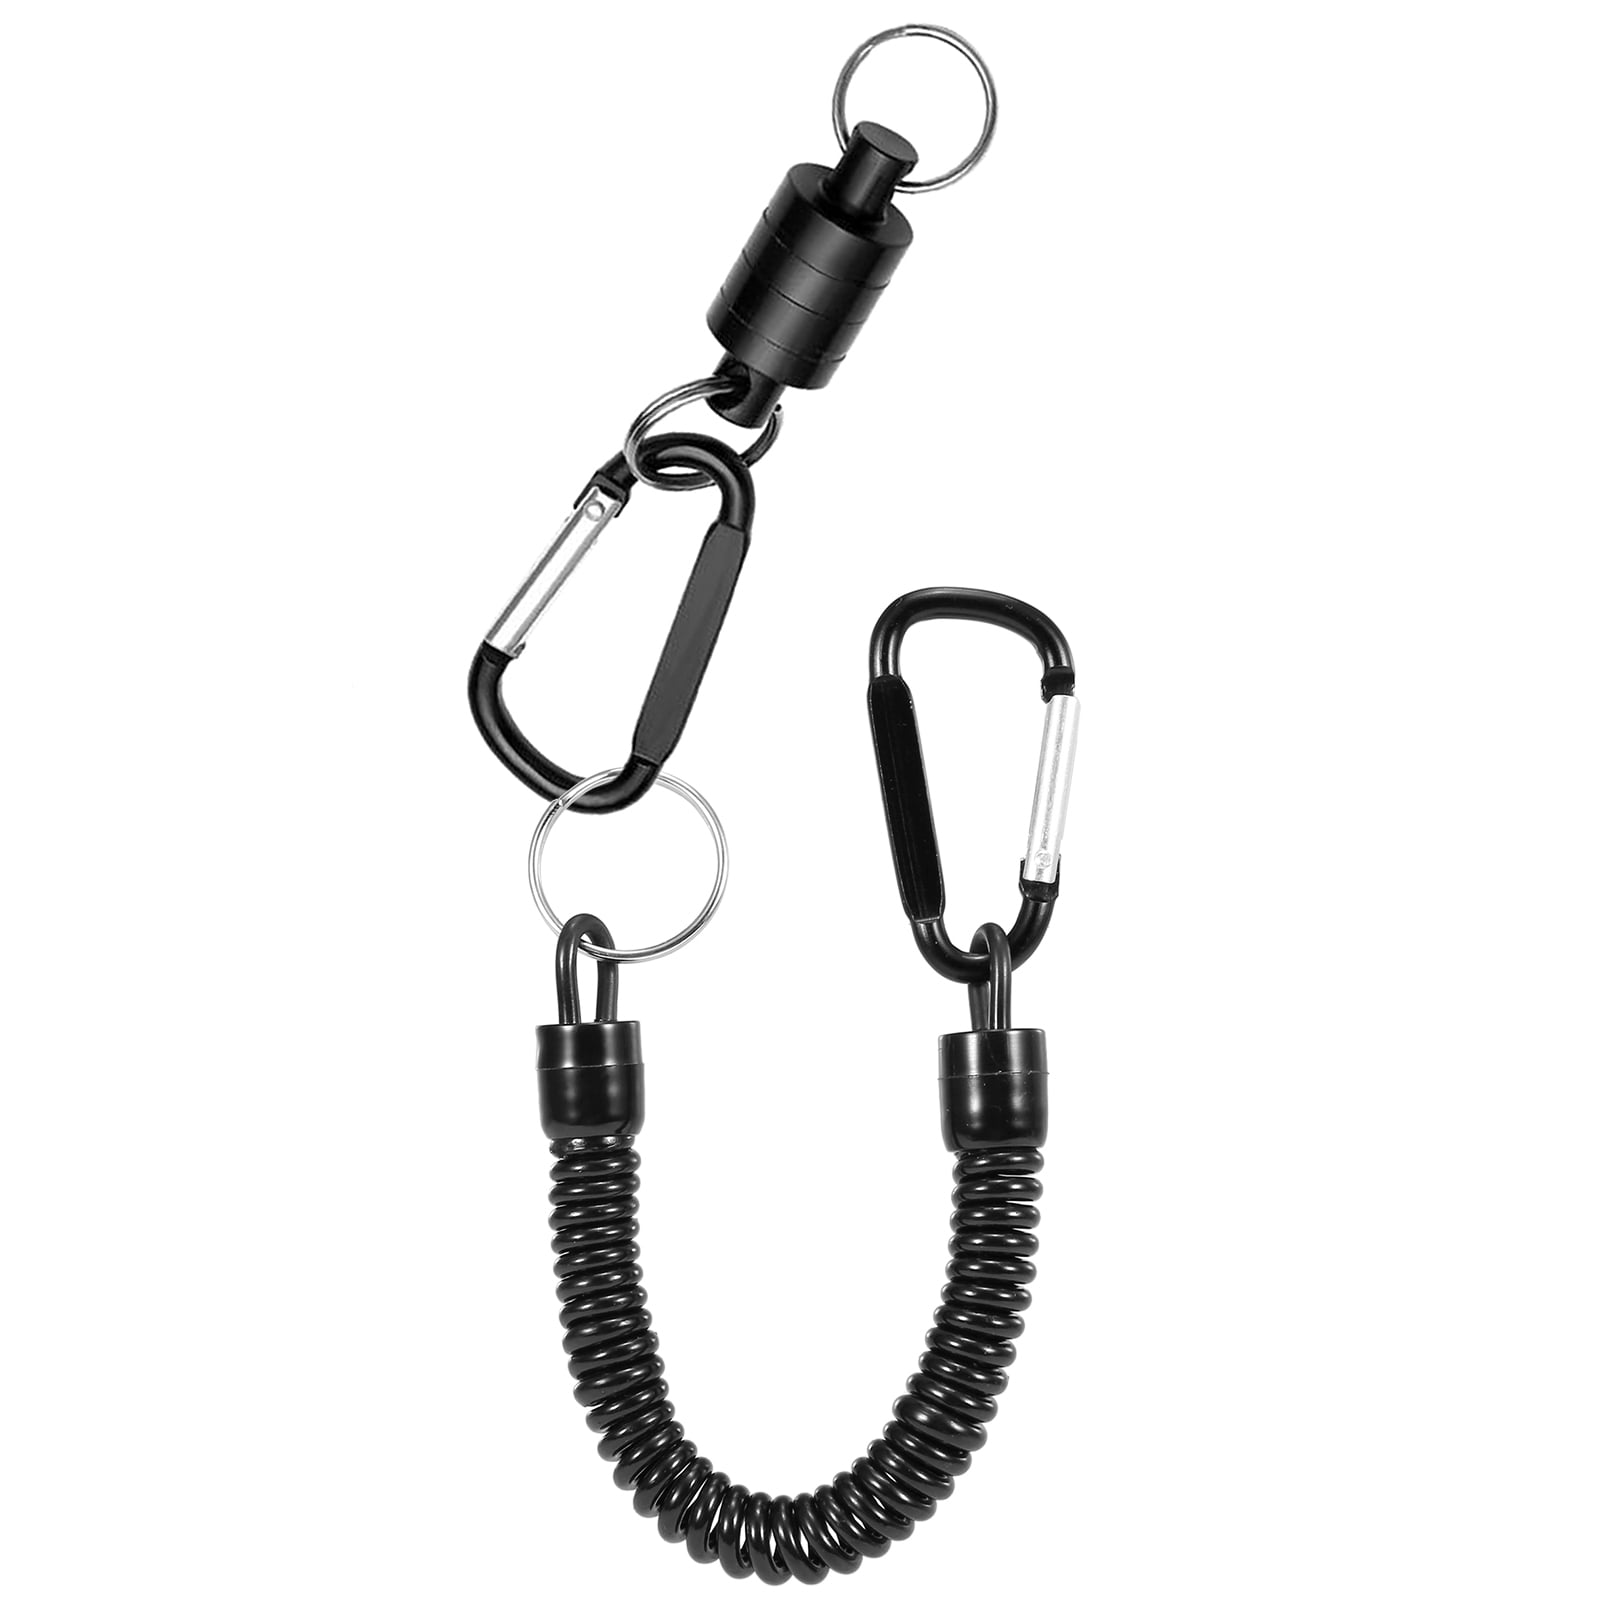 SAMSFX Fishing Strongest Magnetic Net Release Magnet Clip Holder Retractor  with Coiled Lanyard